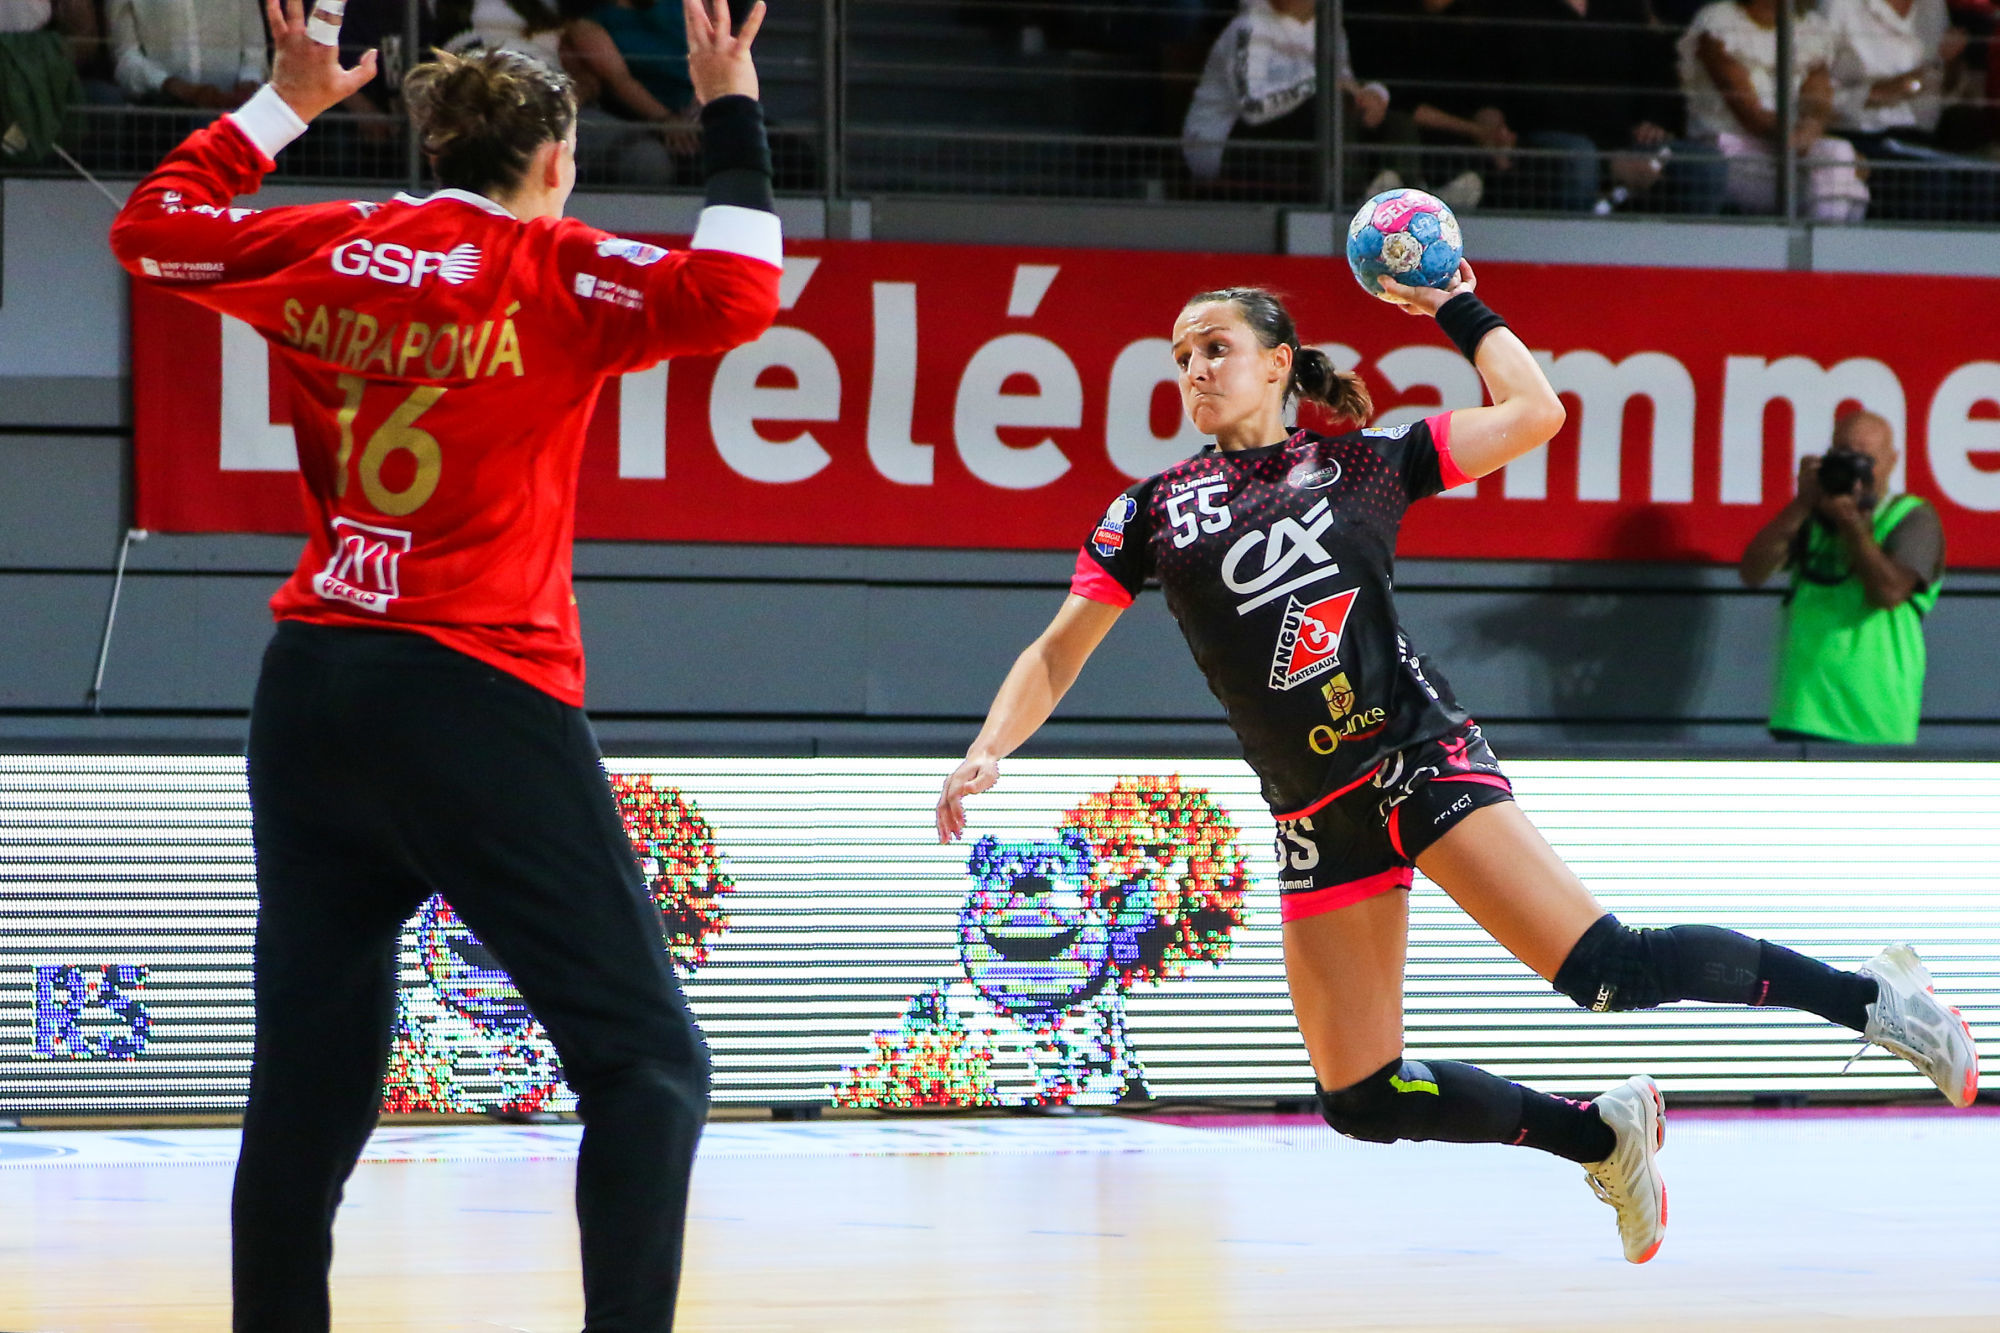 Pauline Coatanea of Brest during the LFH Division 1 handball match between Brest and Paris 92 on August 28th 2019
Photo : Olivier Stephan / Icon Sport